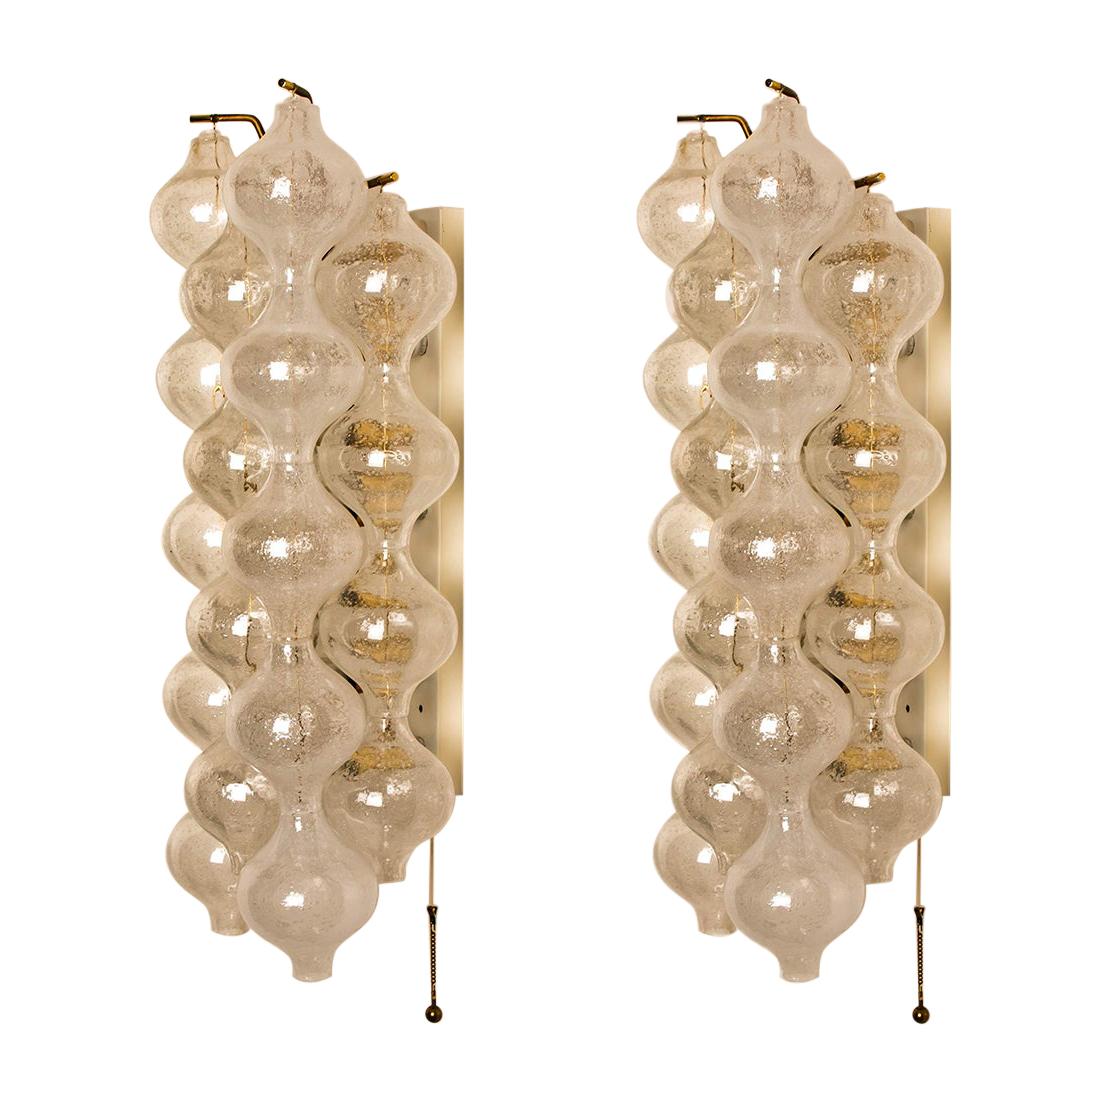 1 of the 8 unique large and elegant 'Tulipan' glass wall sconces by J.T. Kalmar, Austria, Vienna, manufactured in midcentury, circa 1970 (late 1960s or-early 1970s). Tulip shaped hand blown bubble glasses. With a white enameled metal frame which